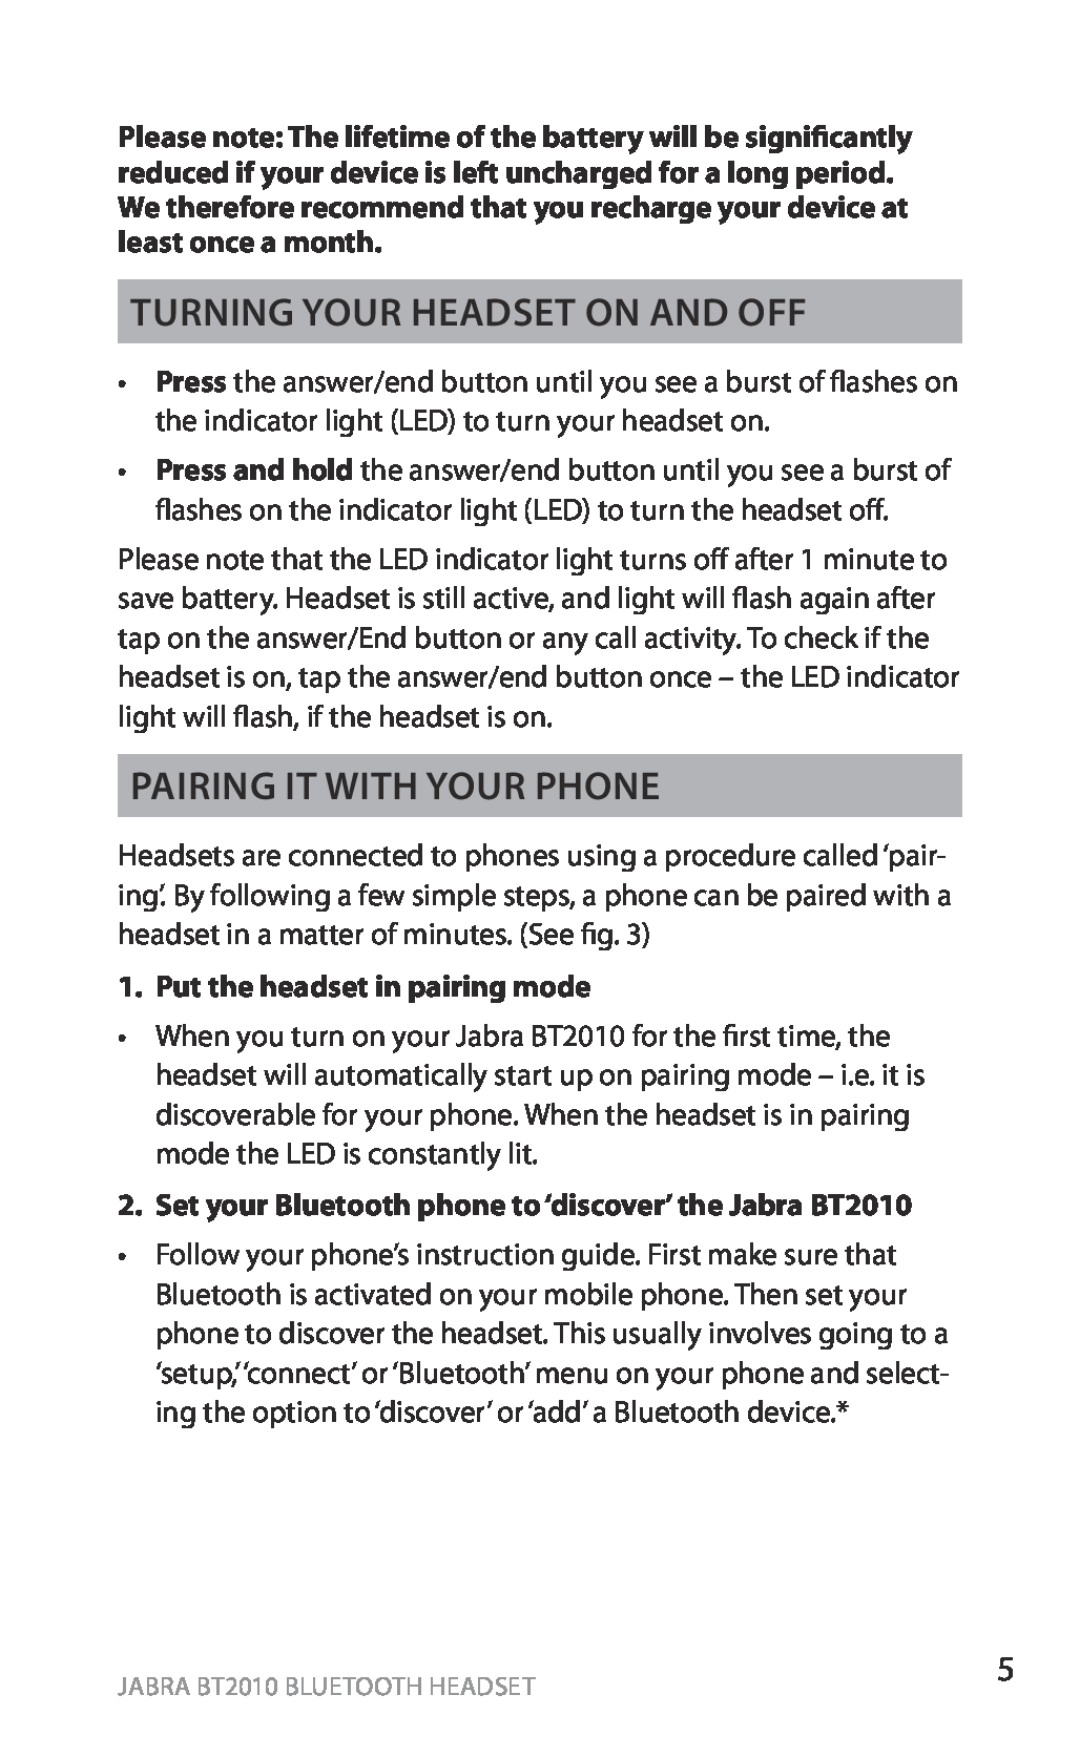 Jabra BT2010 Turning your headset on and off, Pairing it with your phone, Put the headset in pairing mode, english 